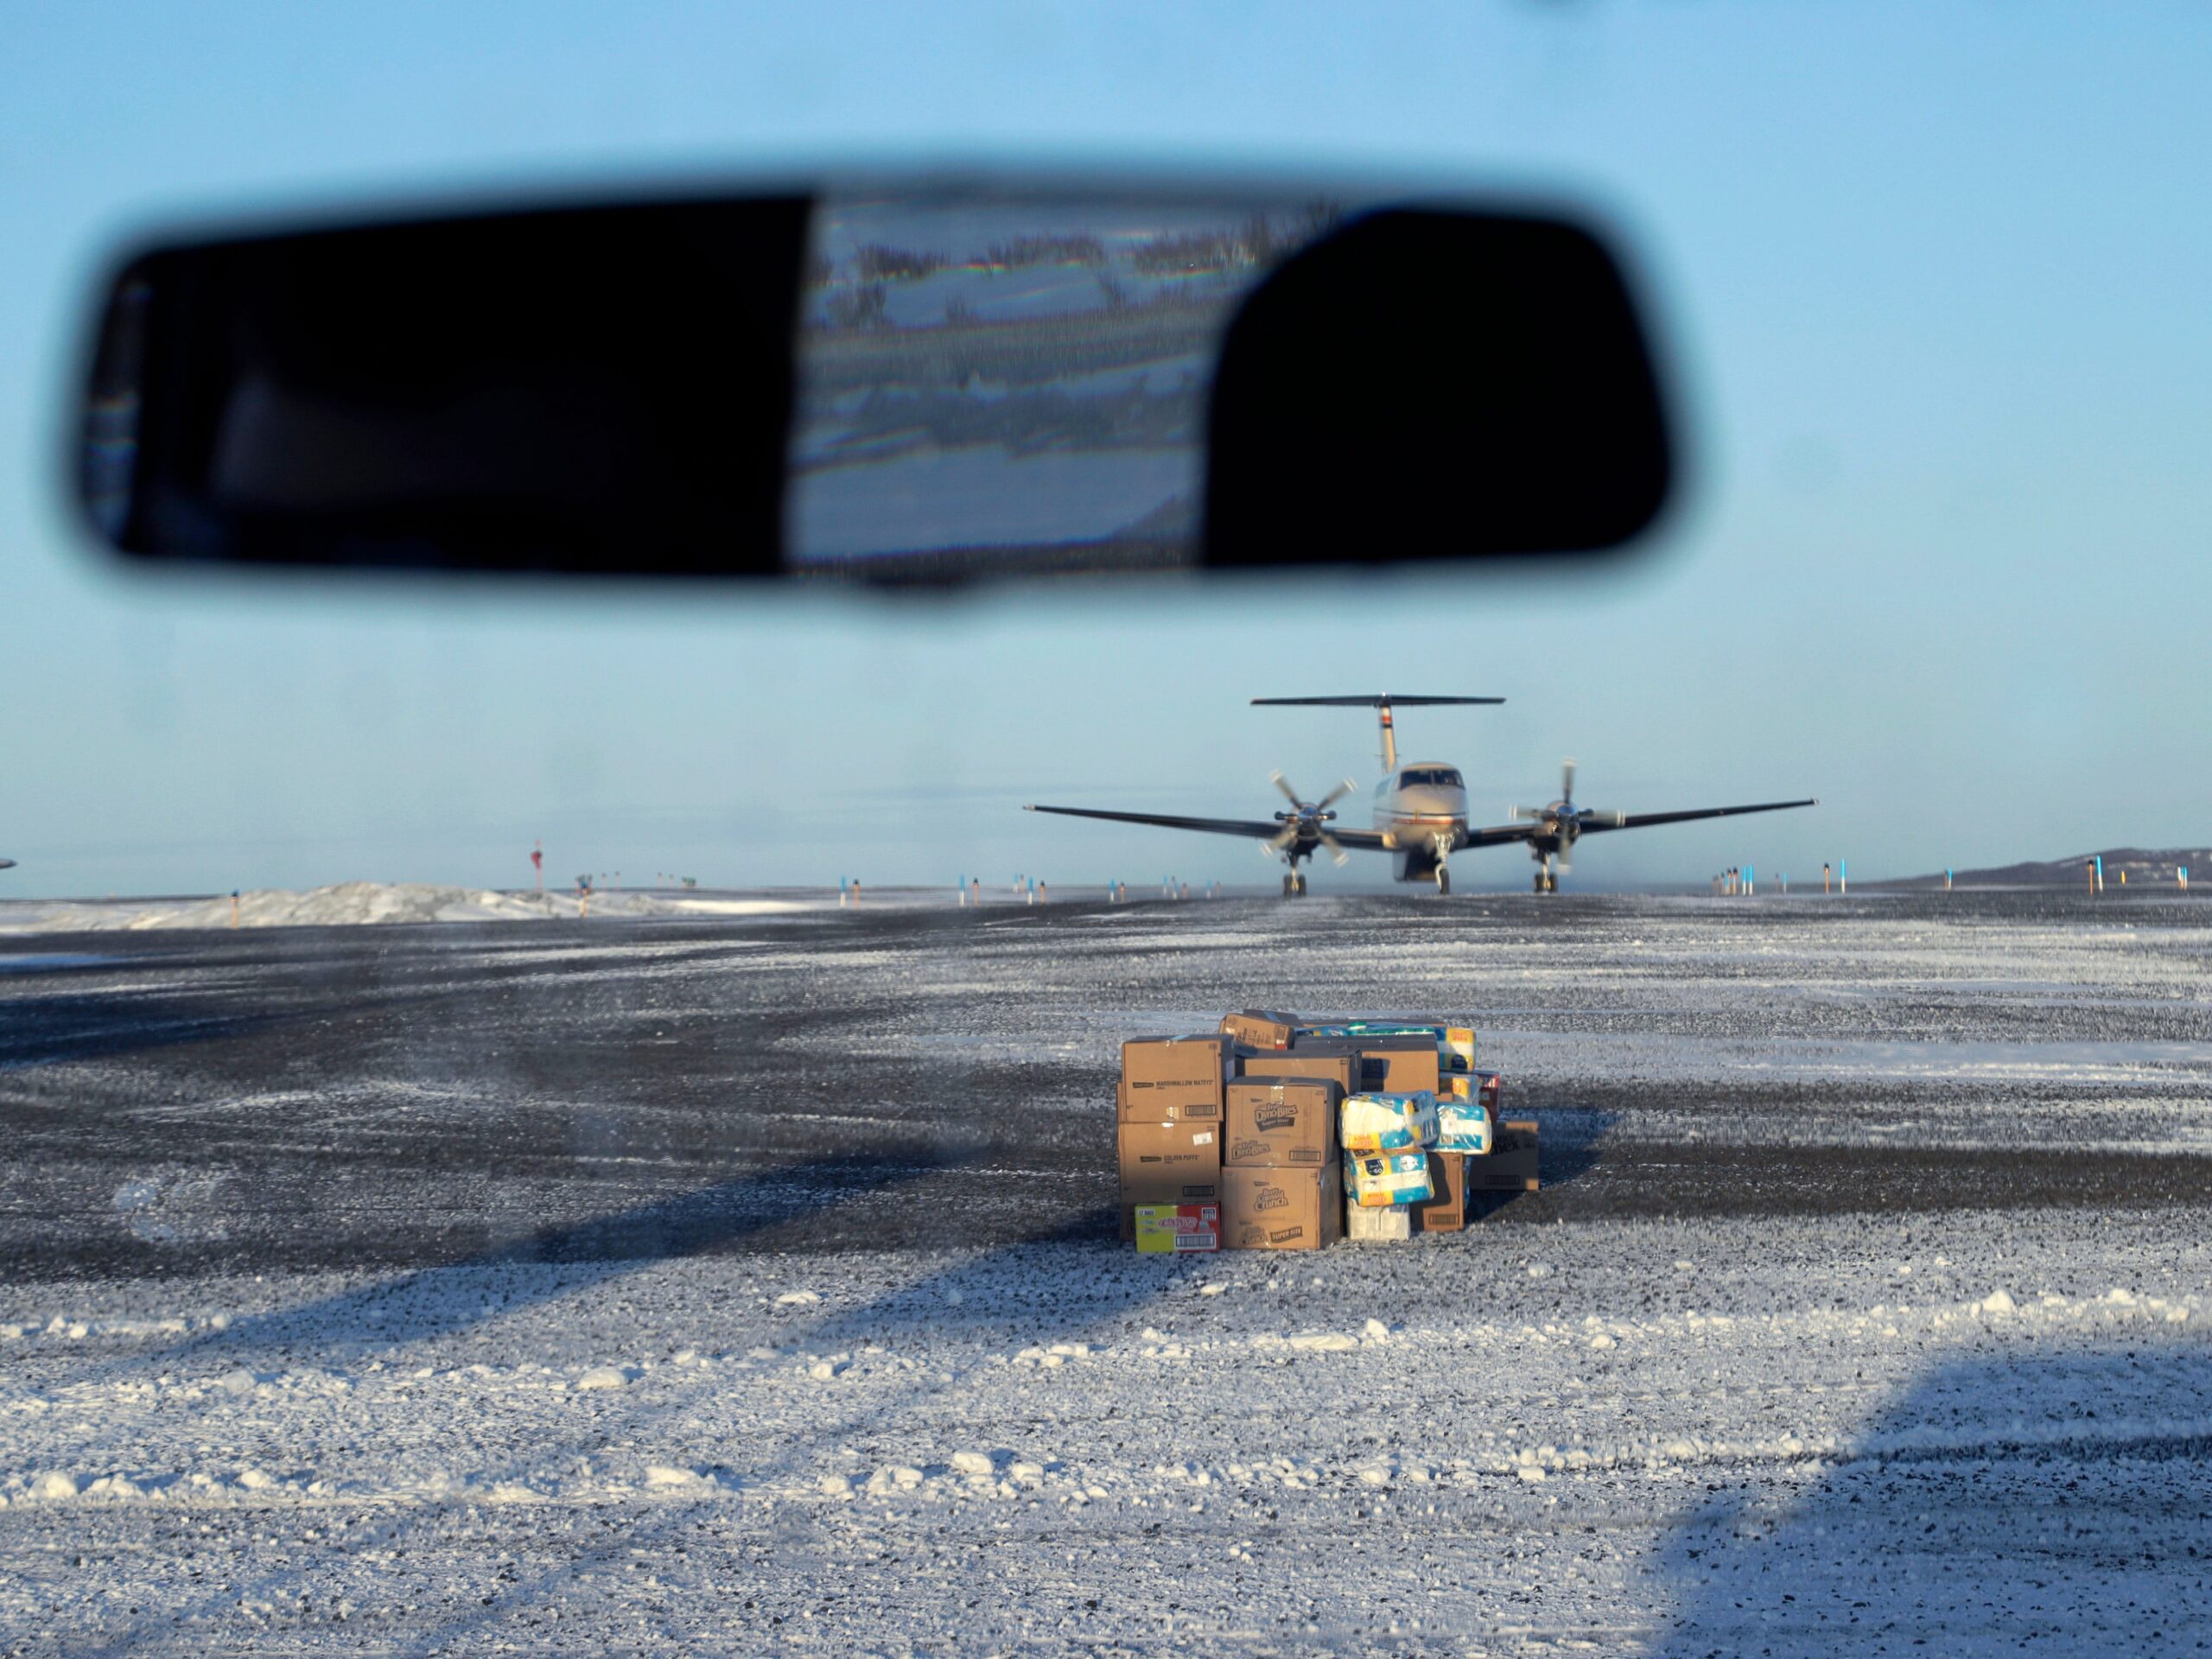 A pile of boxes sits on a snowy tarmac as with a plane in the background.